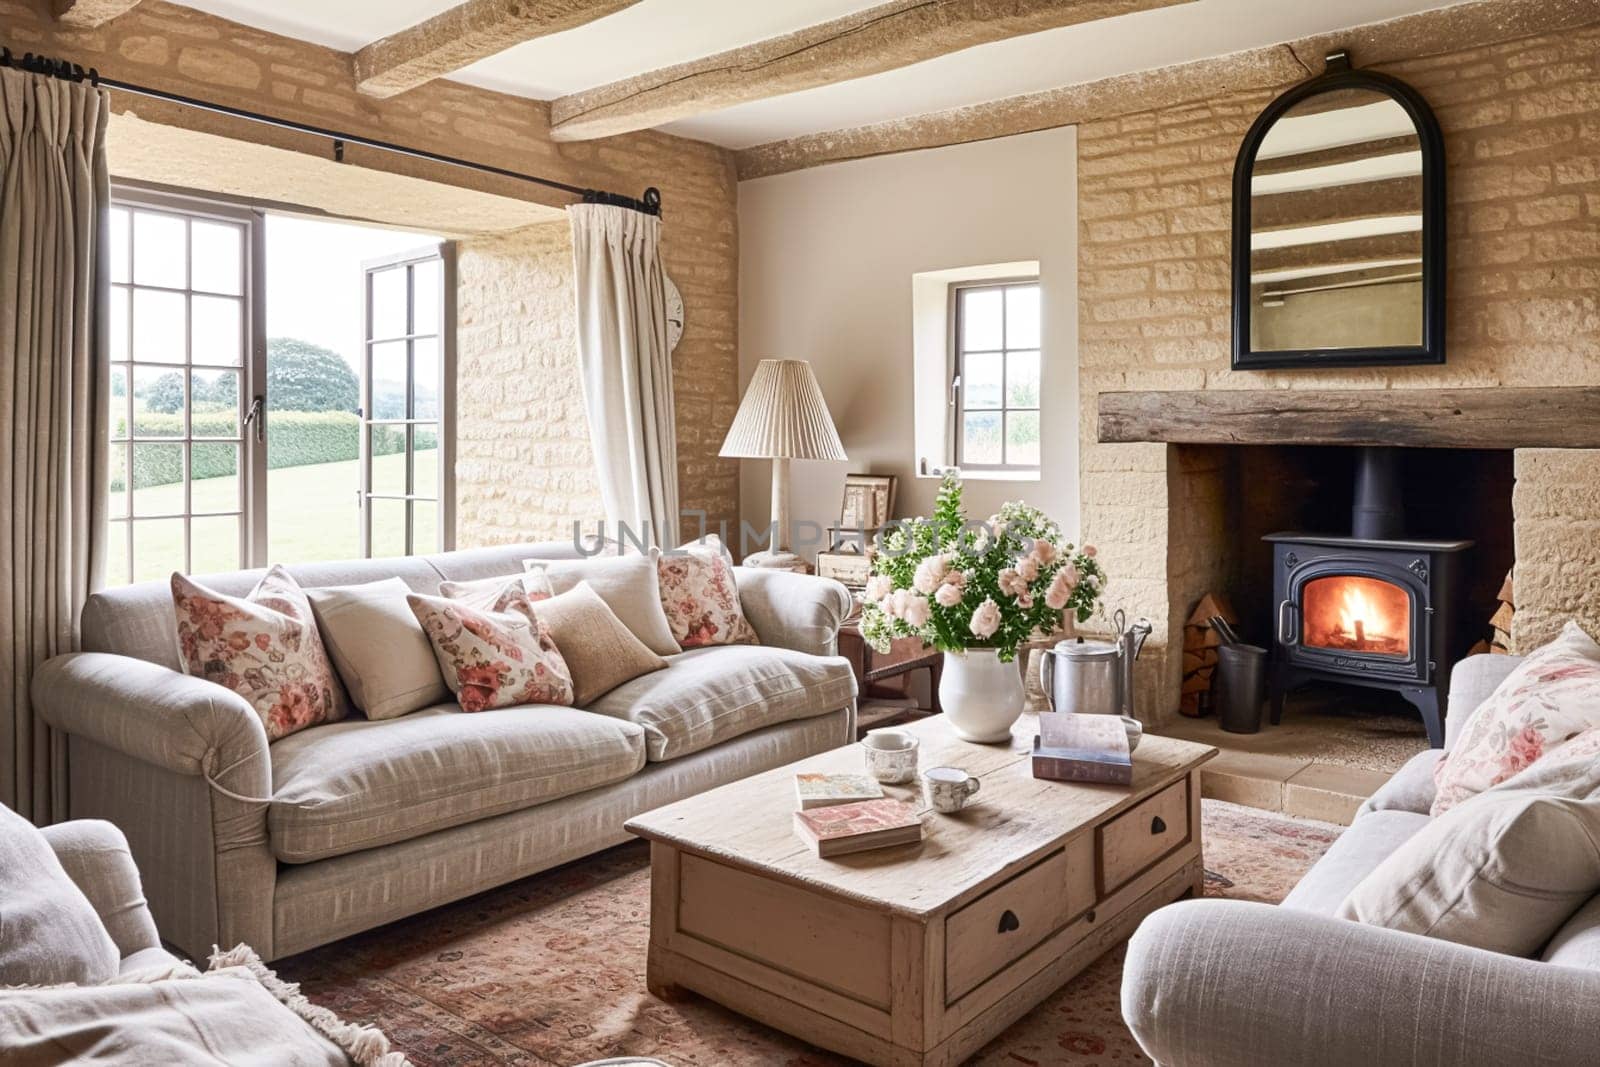 Neutral cottage sitting room with fireplace, living room interior design and country house home decor, sofa and lounge furniture, English countryside style interiors